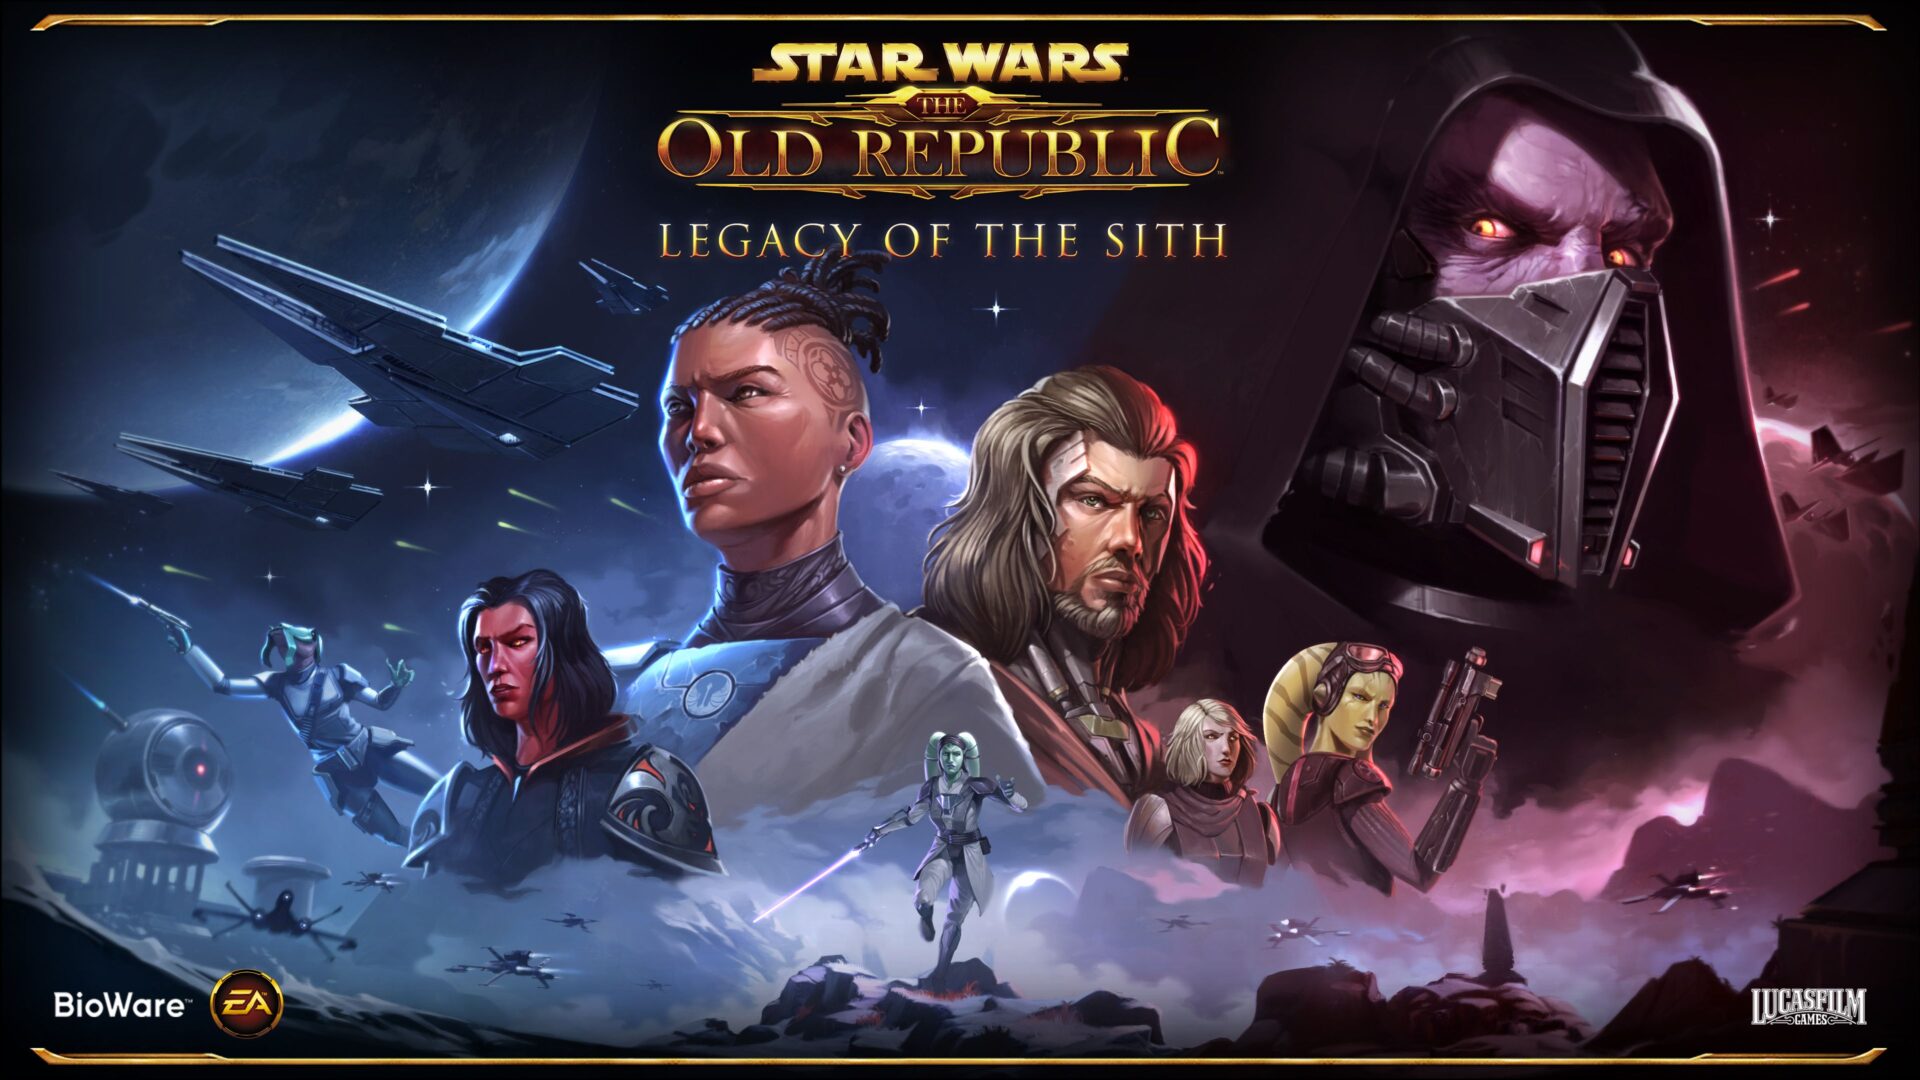 Star Wars: The Old Republic - Legacy of the Sith Keyart